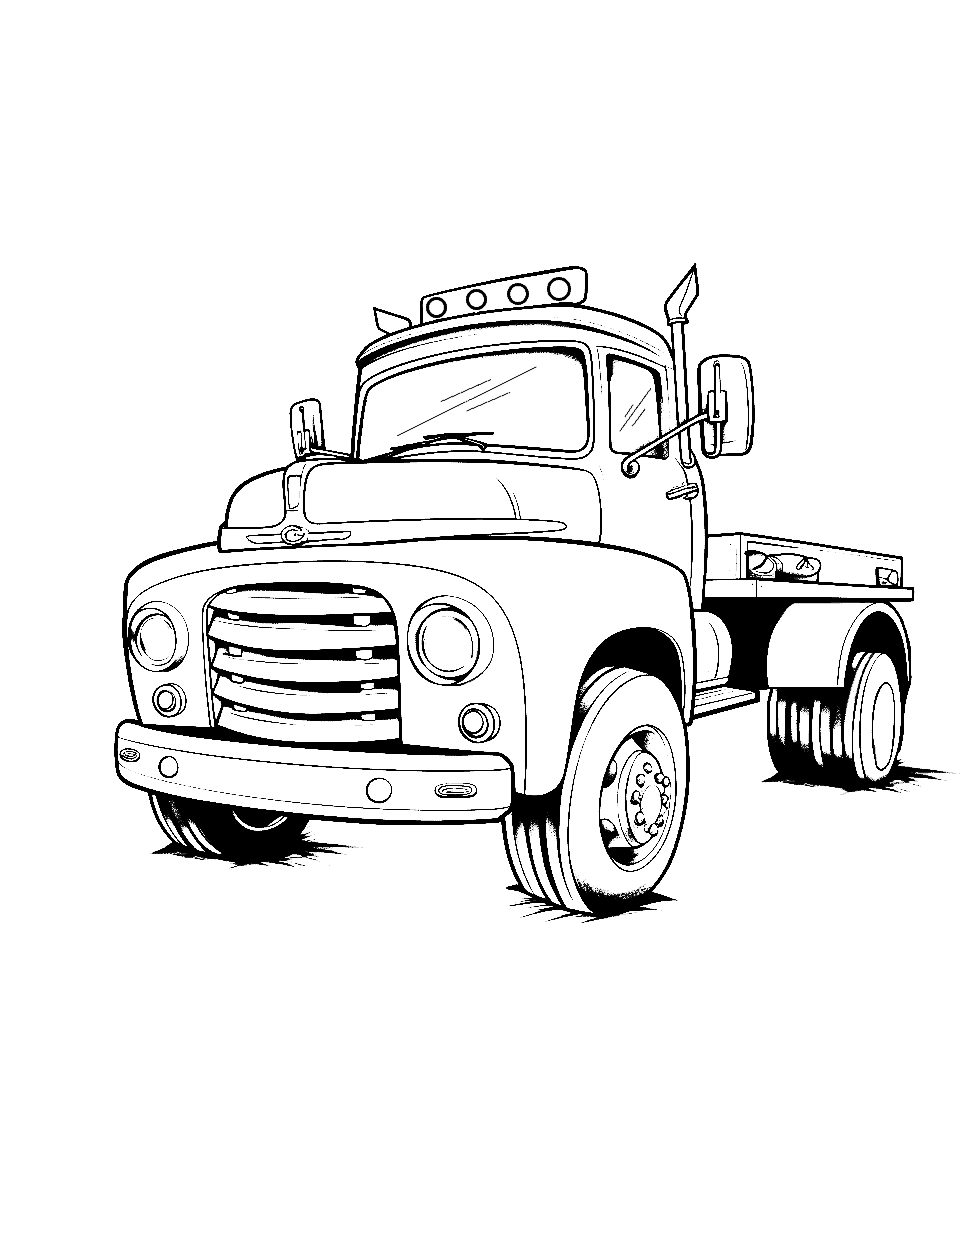 Simple Tow Truck Coloring Page - A simply designed tow truck easy to color.